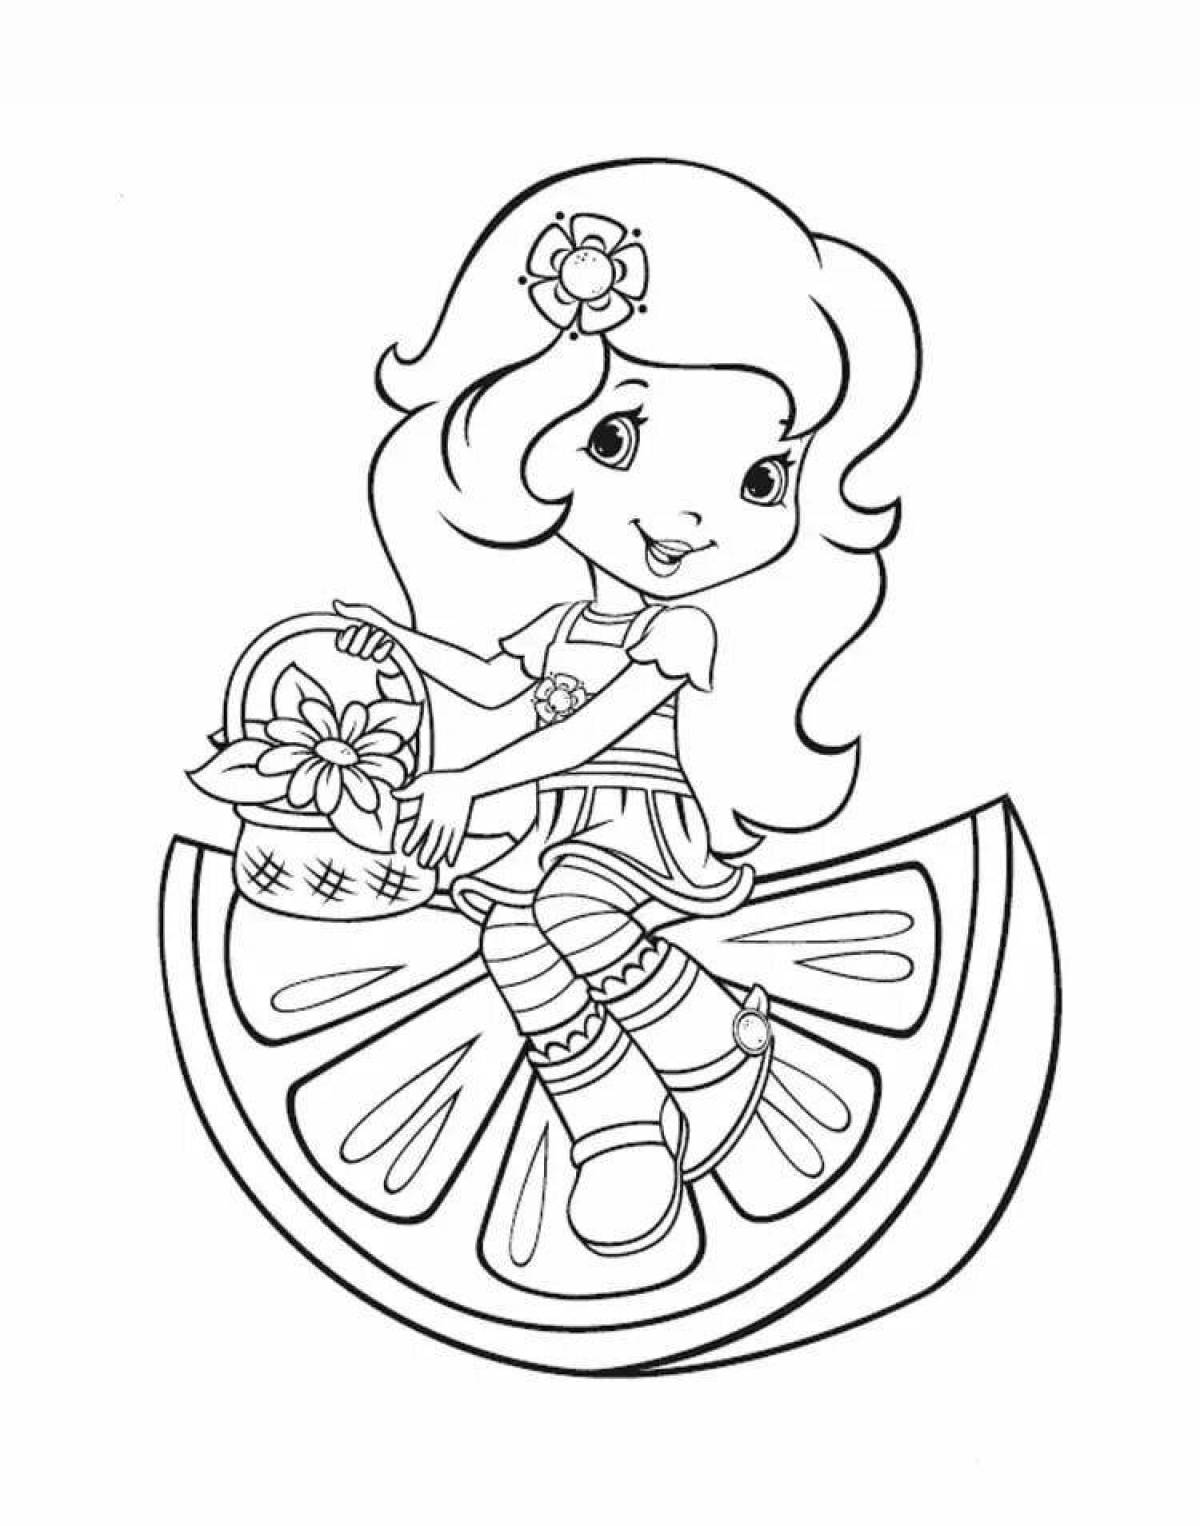 Live coloring for girls 5-7 years old